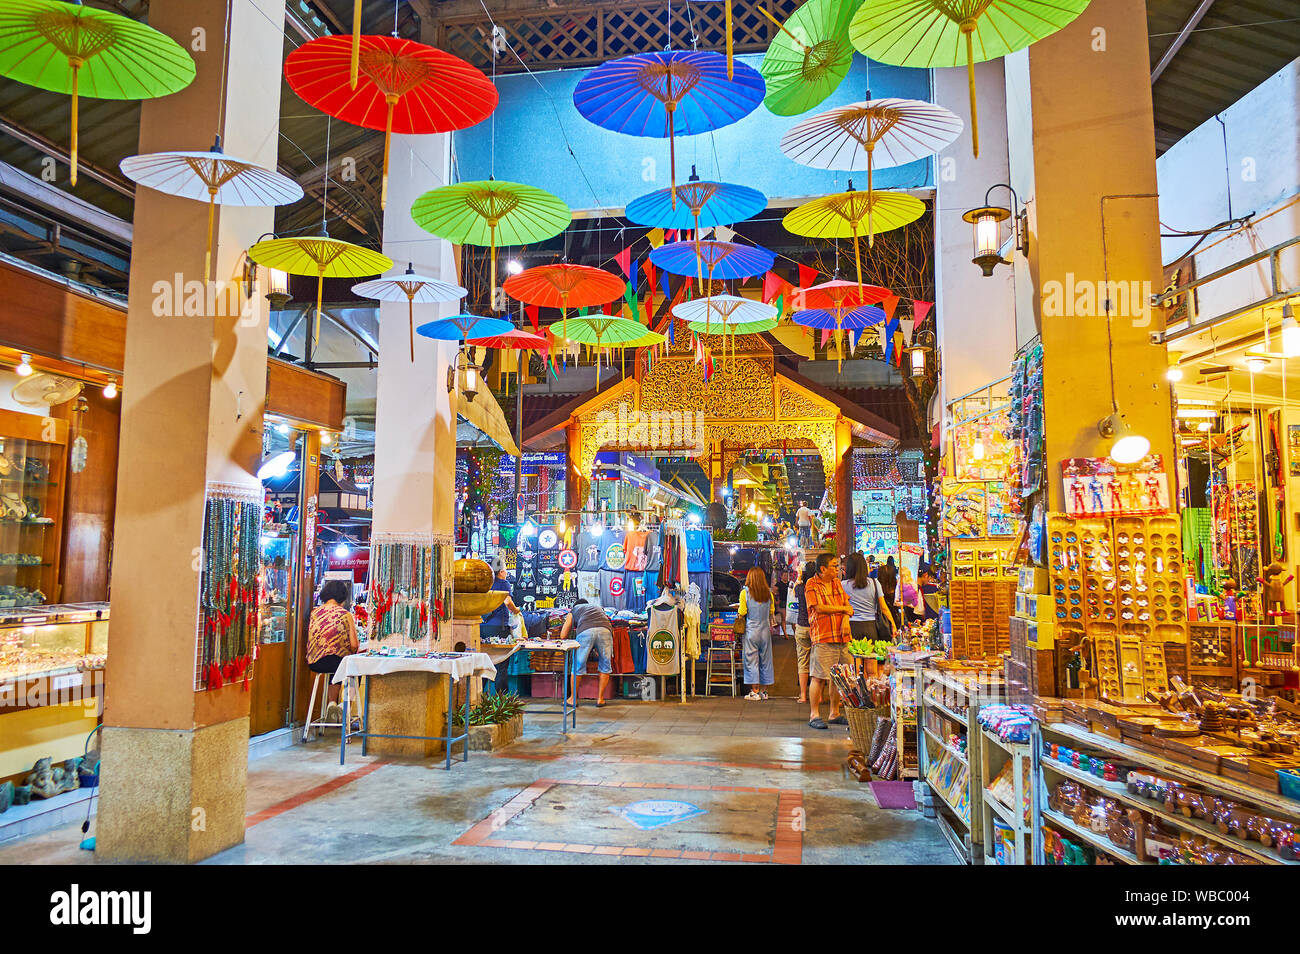 CHIANG MAI, THAILAND - MAY 2, 2019: The hall of Kalare Night Market is decorated with brightly colored Oriental umbrellas, on May 2 in Chiang Mai Stock Photo